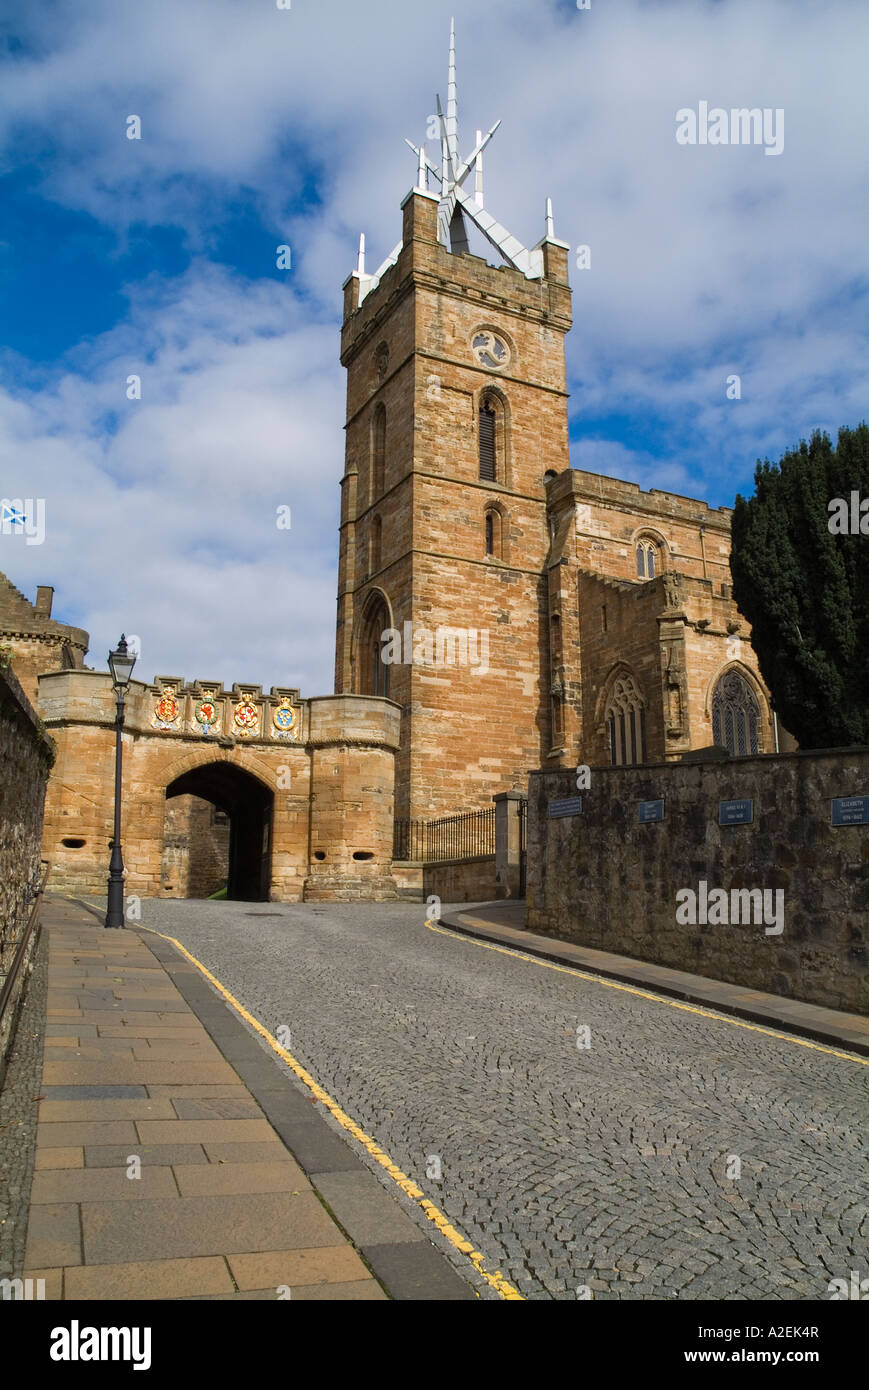 dh Outer gate LINLITHGOW PALACE WEST LOTHIAN Entrance St Michaels Parish Church and cobbled street heritage building scotland Stock Photo